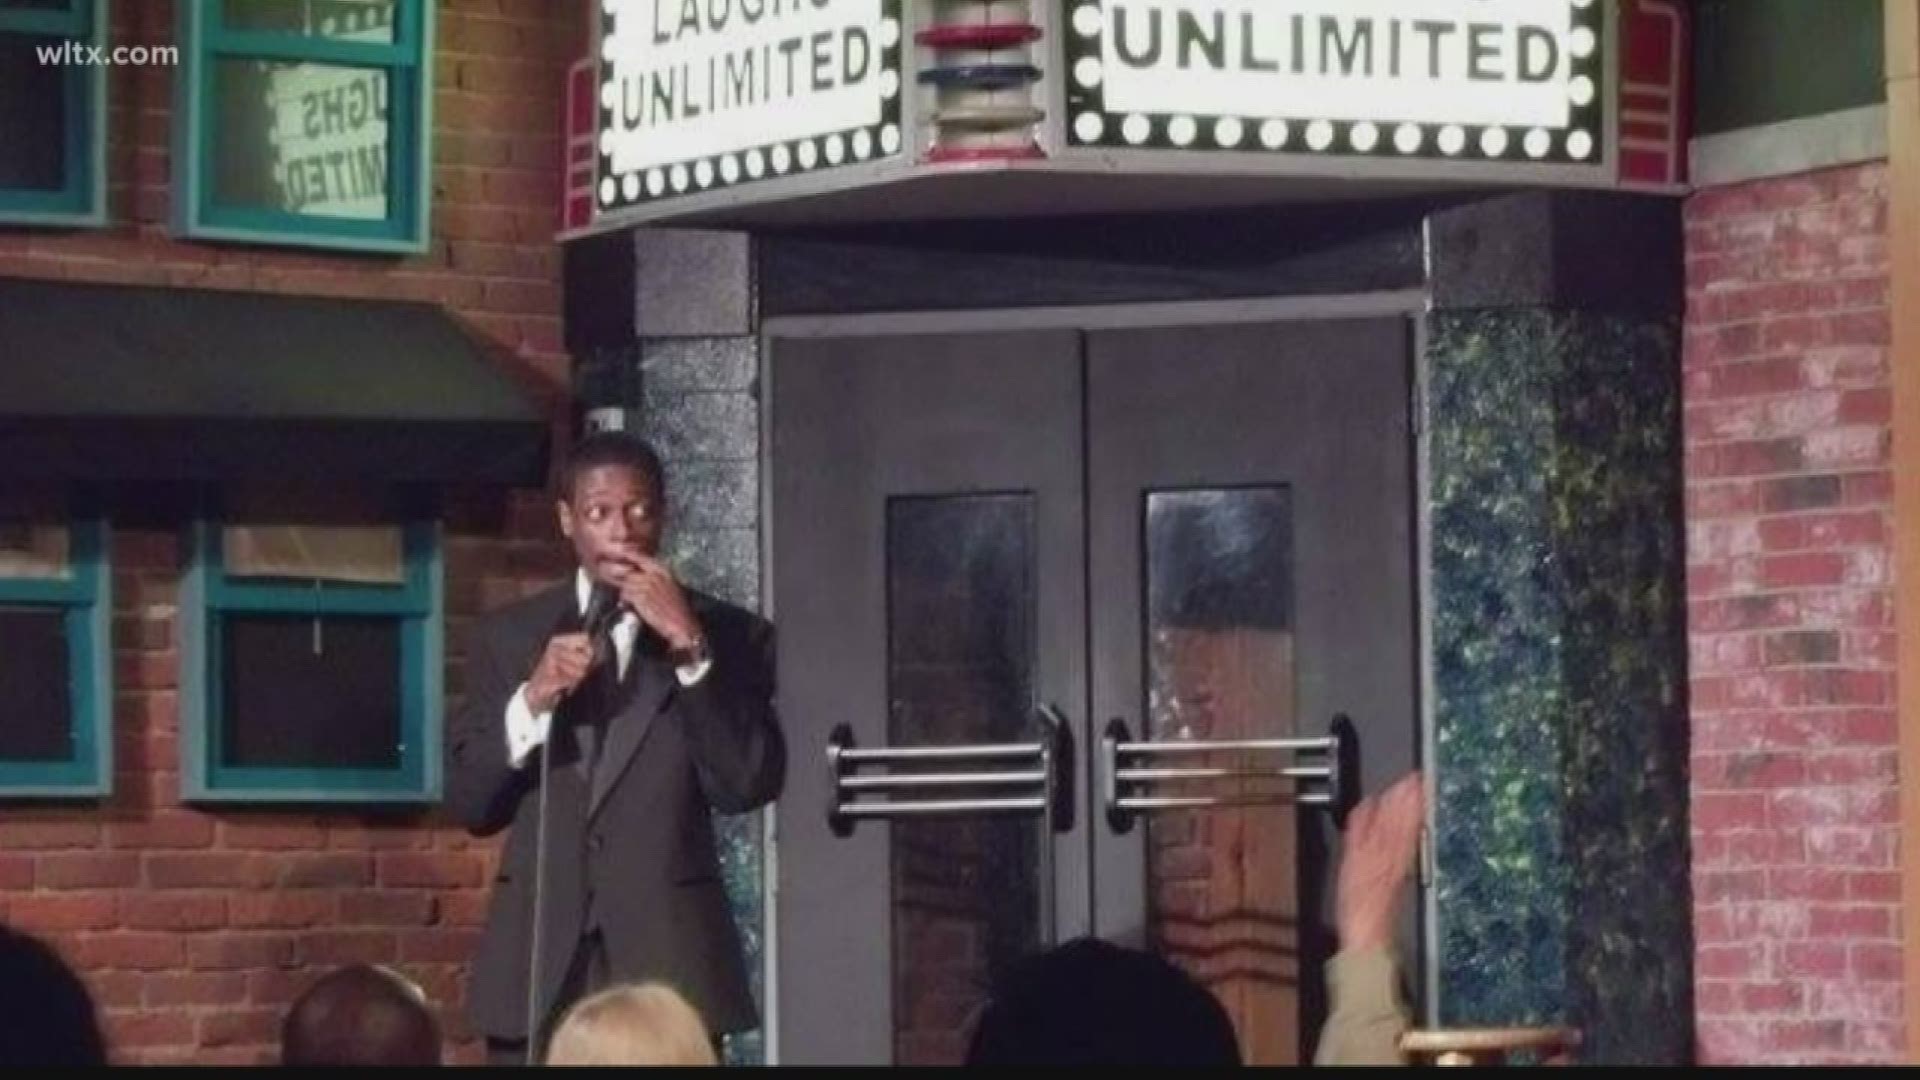 Typically funerals and comedy don't go together but for one Sumter man, they don't only go together, they are part of the reason he's become an international superstar.